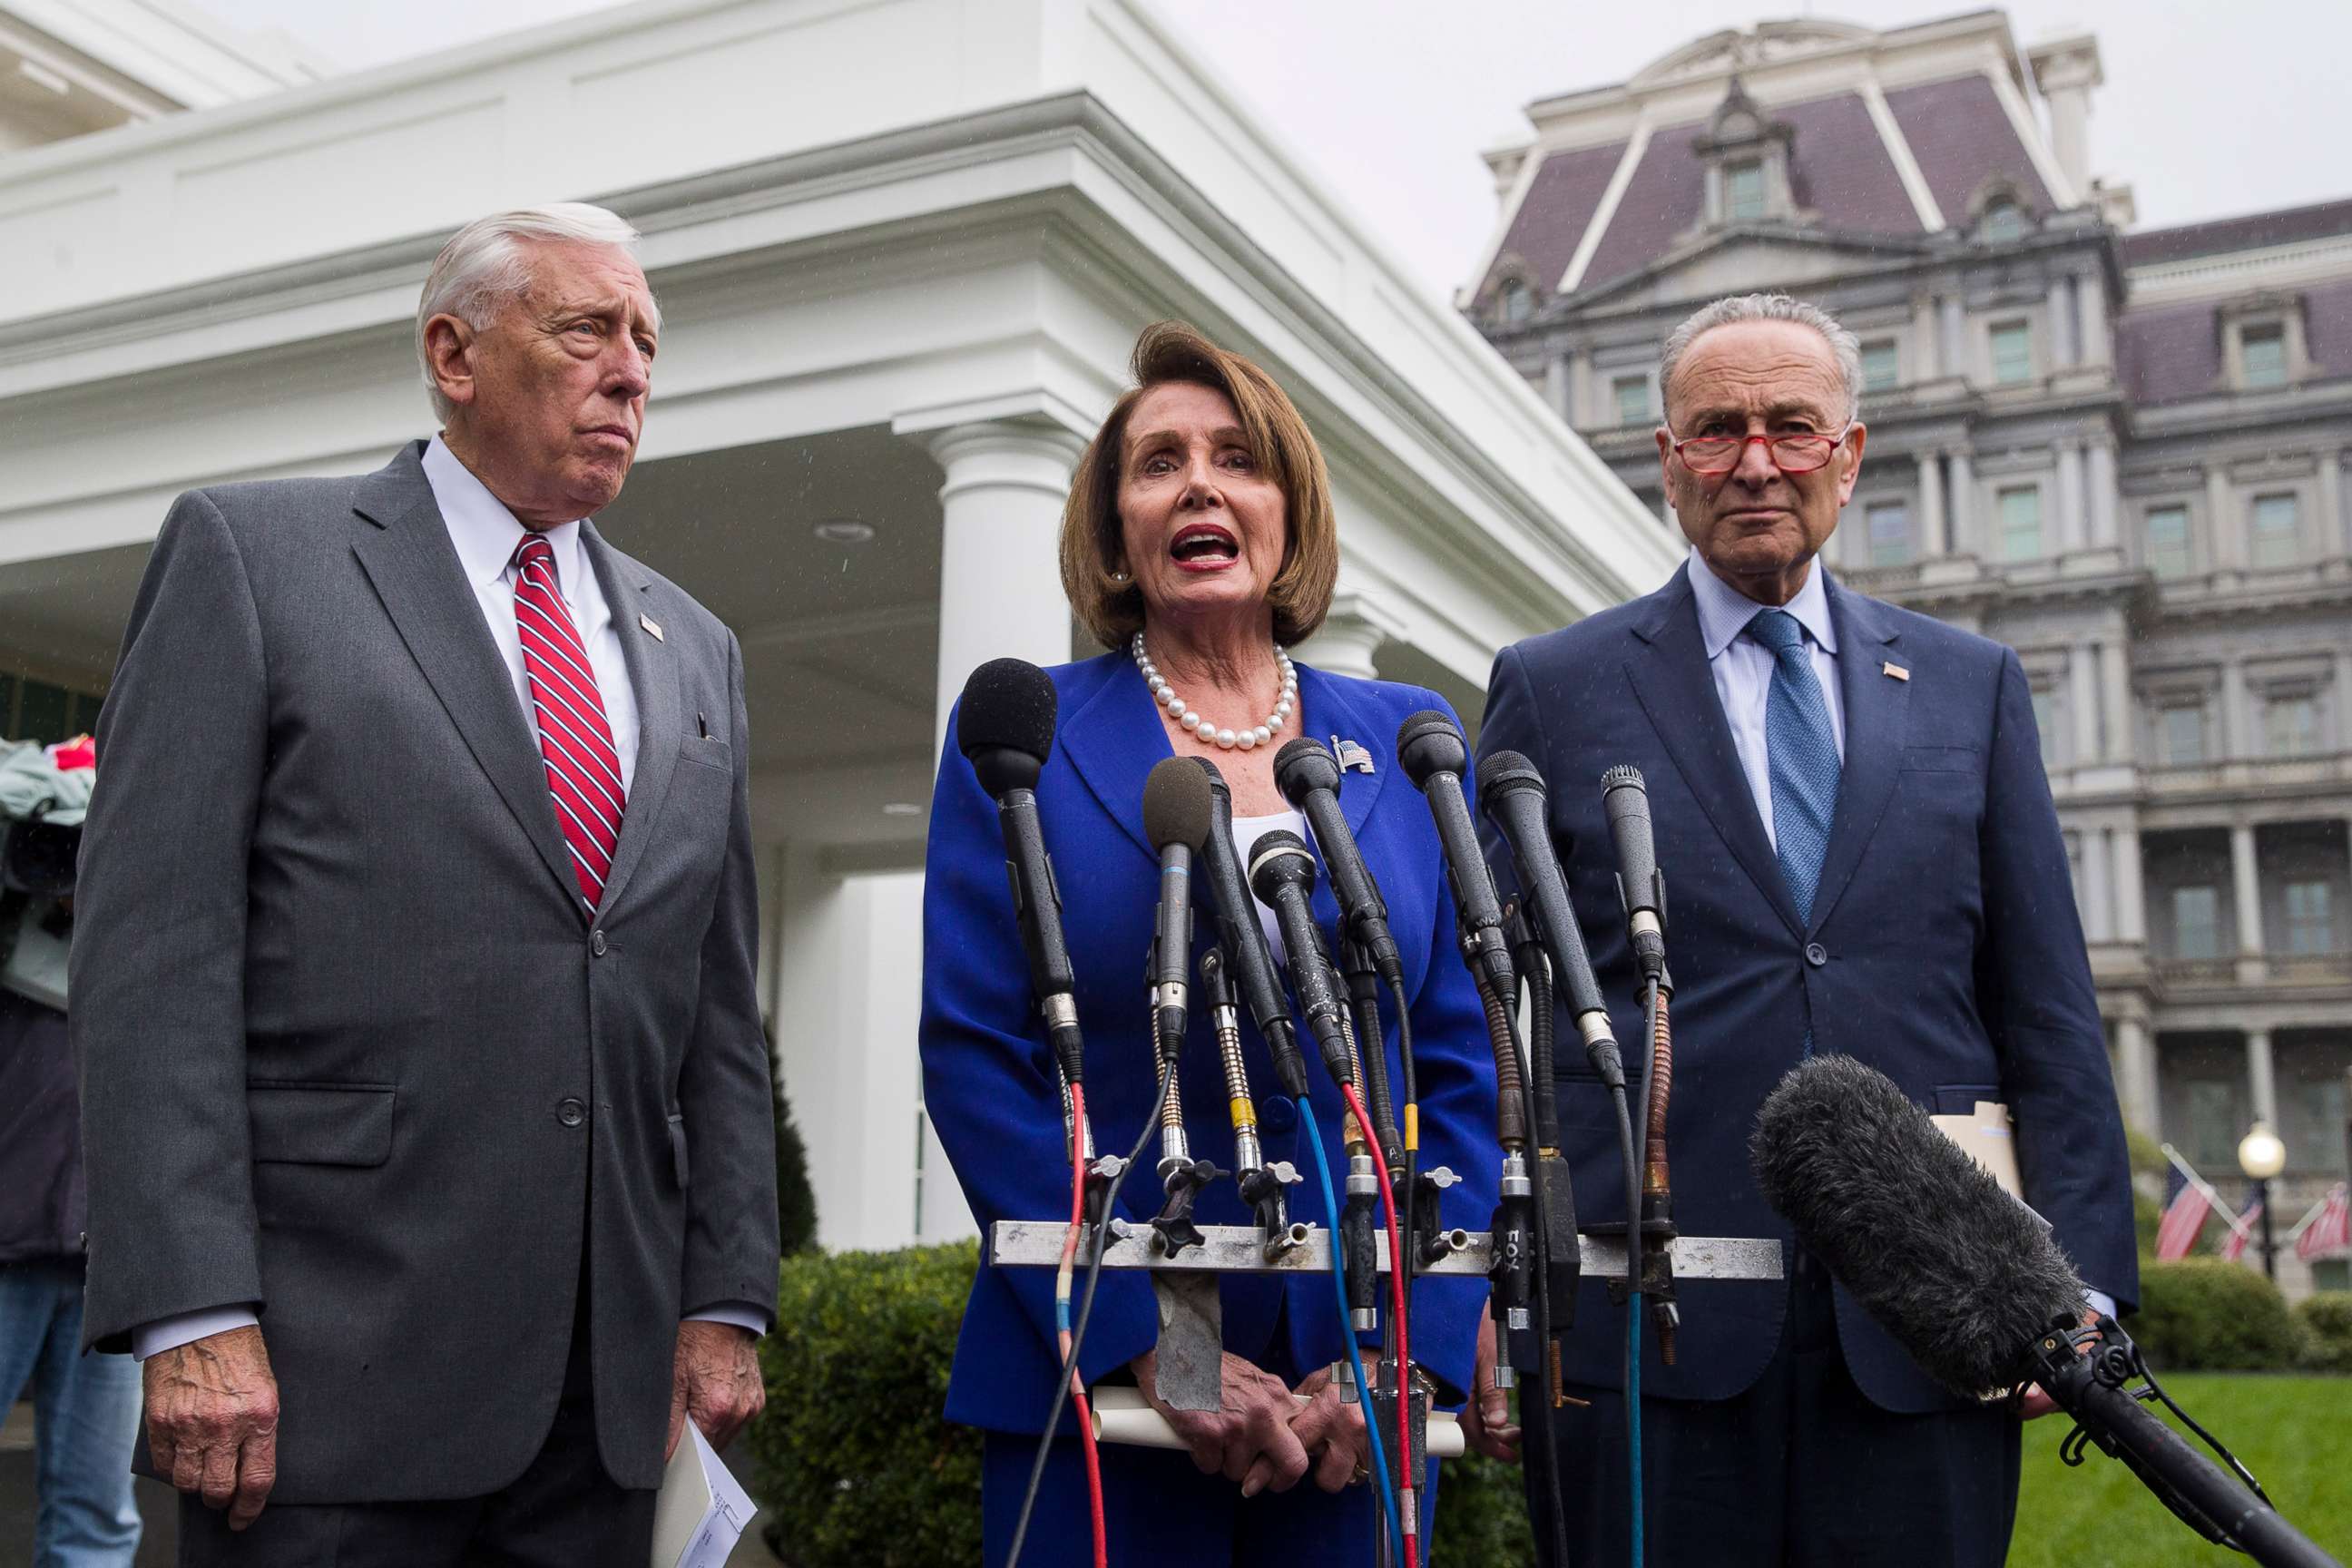 PHOTO: House Majority Leader Steny Hoyer, left, House Speaker Nancy Pelosi, and Senate Minority Leader Chuck Schumer, speak with reporters after a meeting with President Donald Trump at the White House, Wednesday, Oct. 16, 2019, in Washington.